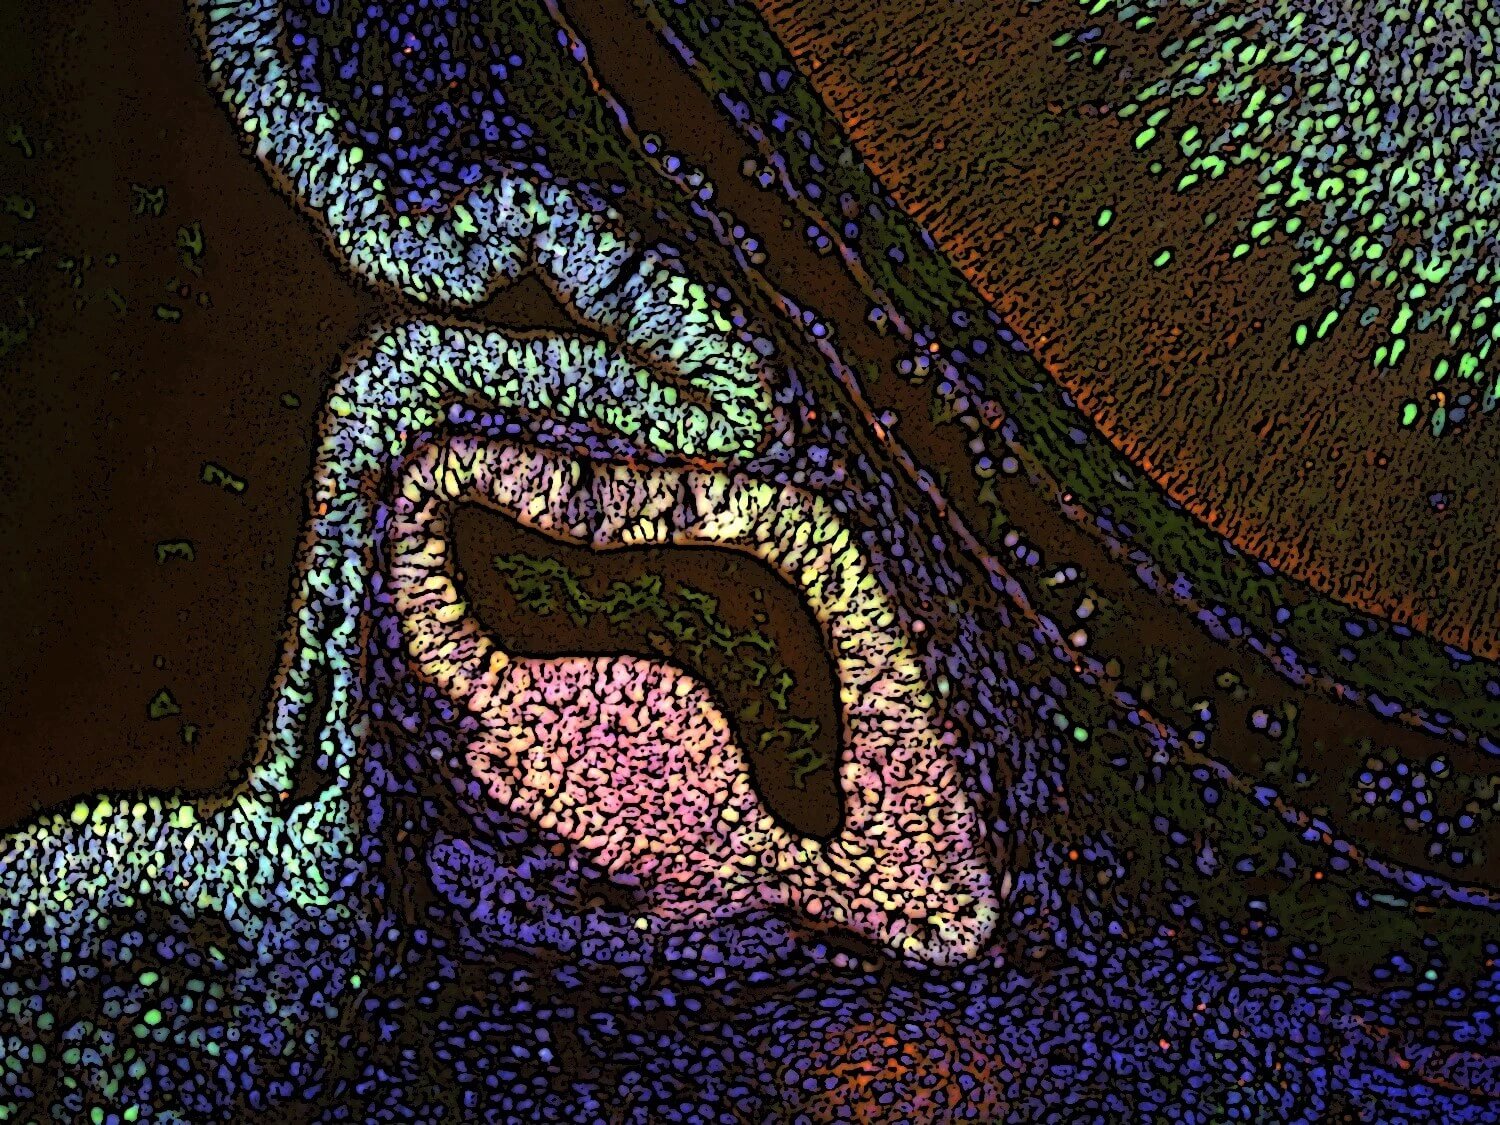 Image of the pituitary gland from the 2023 Endocrine Images Art Competition